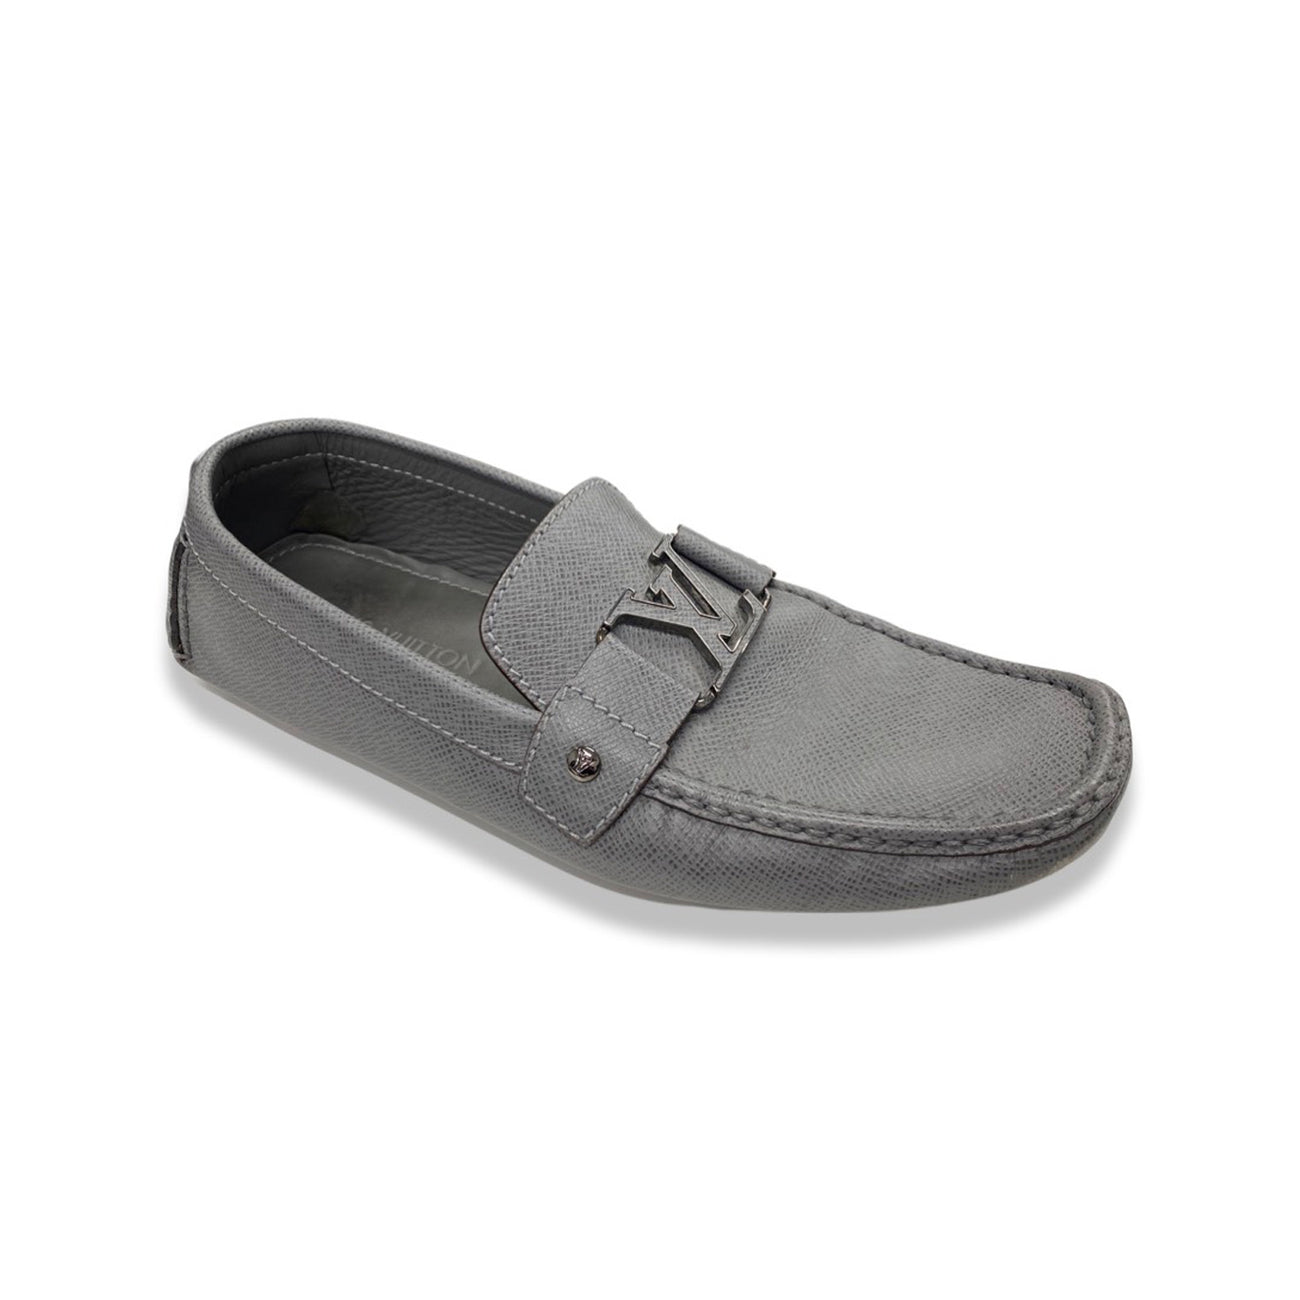 LV CLUB LOAFERS Iconic Light Weight Premium Quality Mocassin For Men  Buy  LV CLUB LOAFERS Iconic Light Weight Premium Quality Mocassin For Men Online  at Best Price  Shop Online for